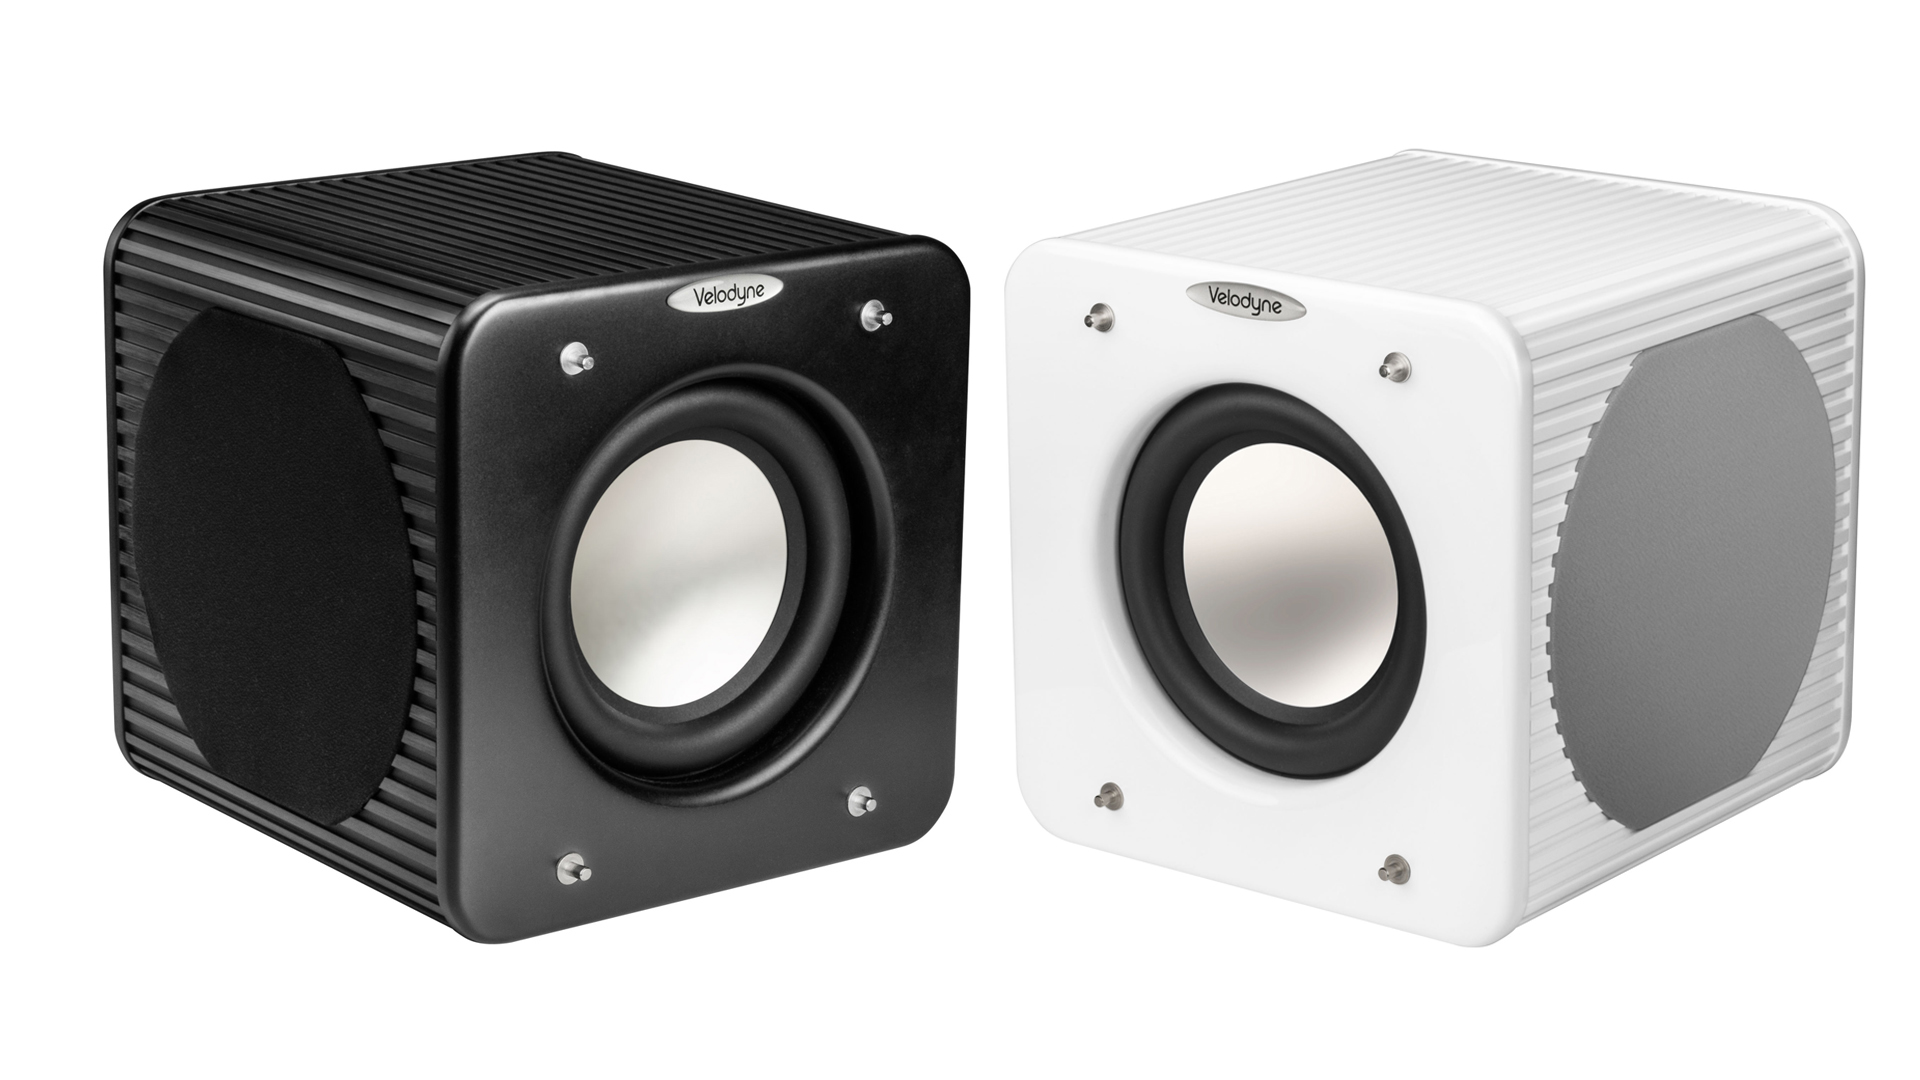 MicroVee MKII in black and white (Image credit: Velodyne) 